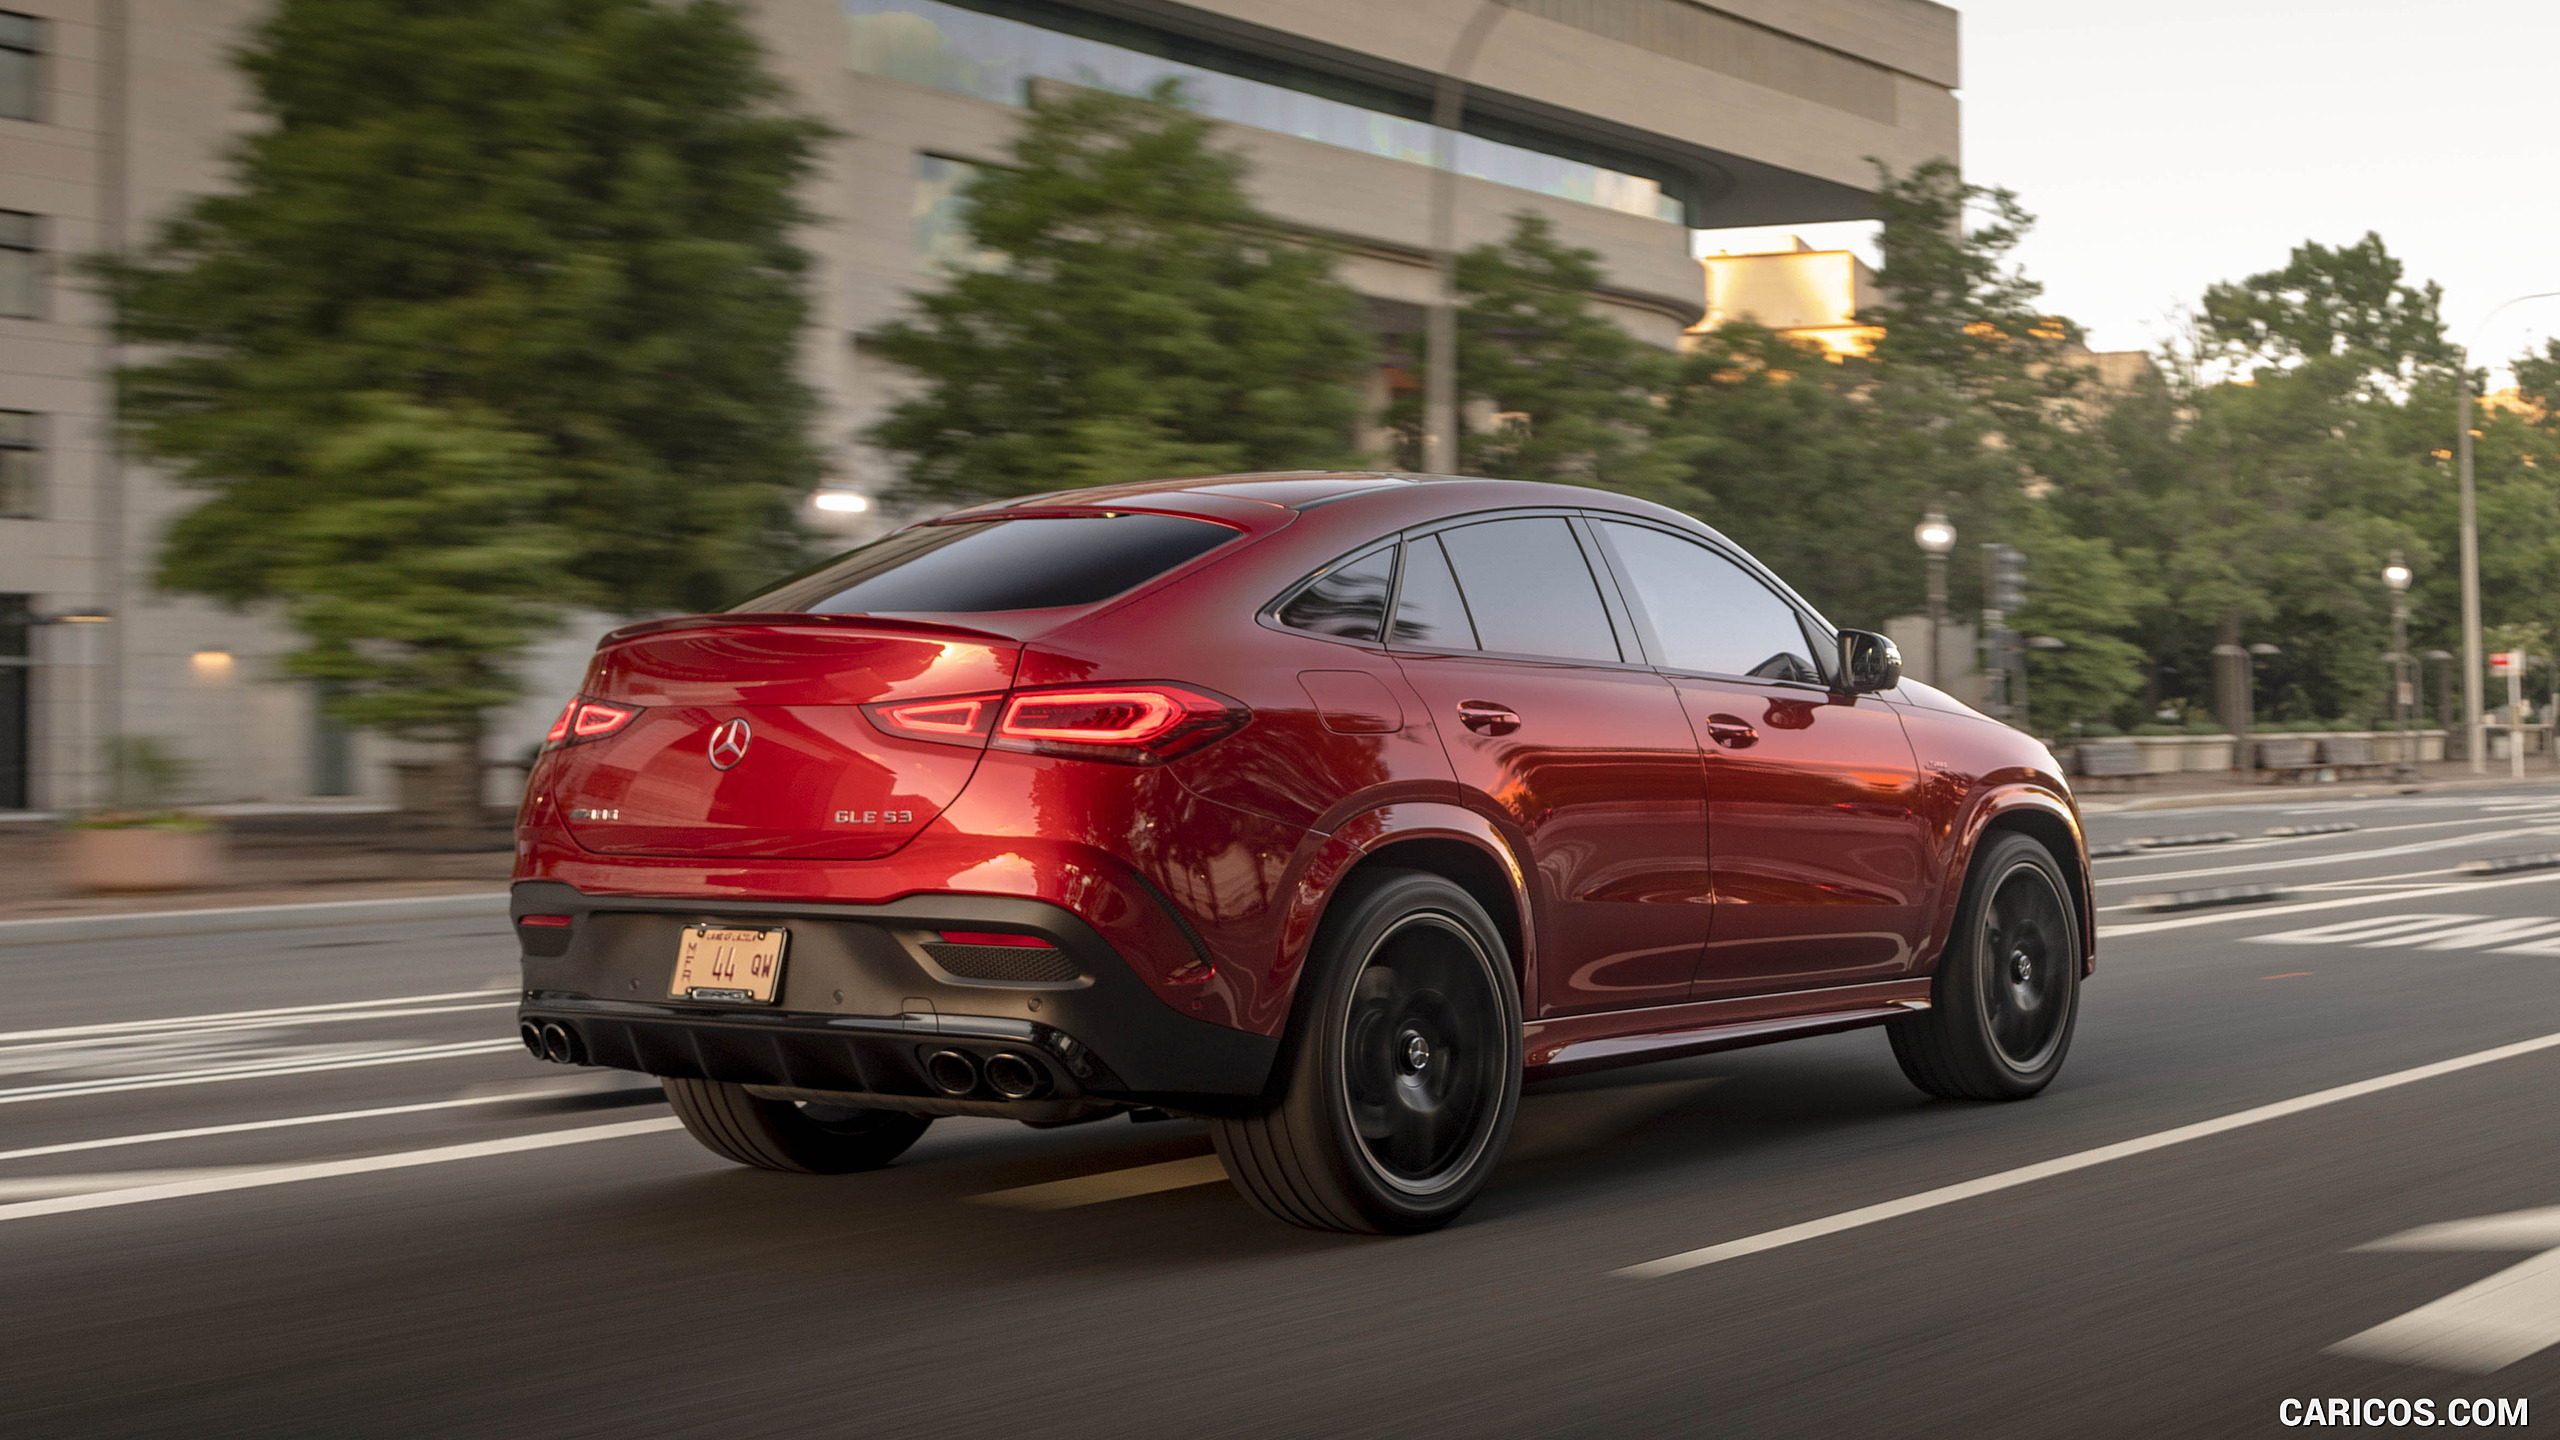 2021 Mercedes-AMG GLE 53 Coupe - Rear Three-Quarter, #119 of 178